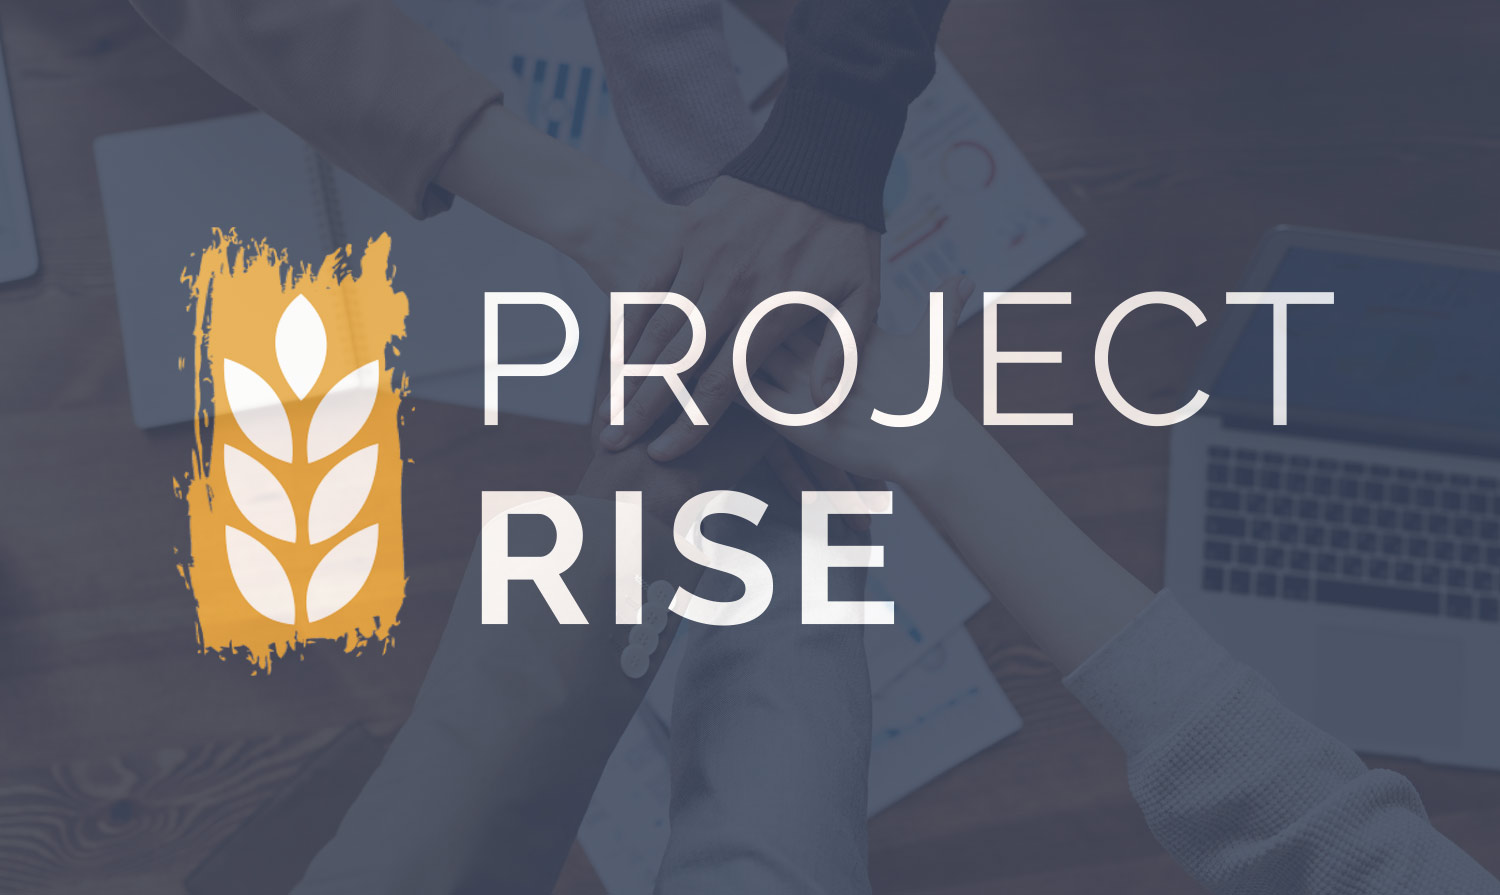 Project Rise get involved